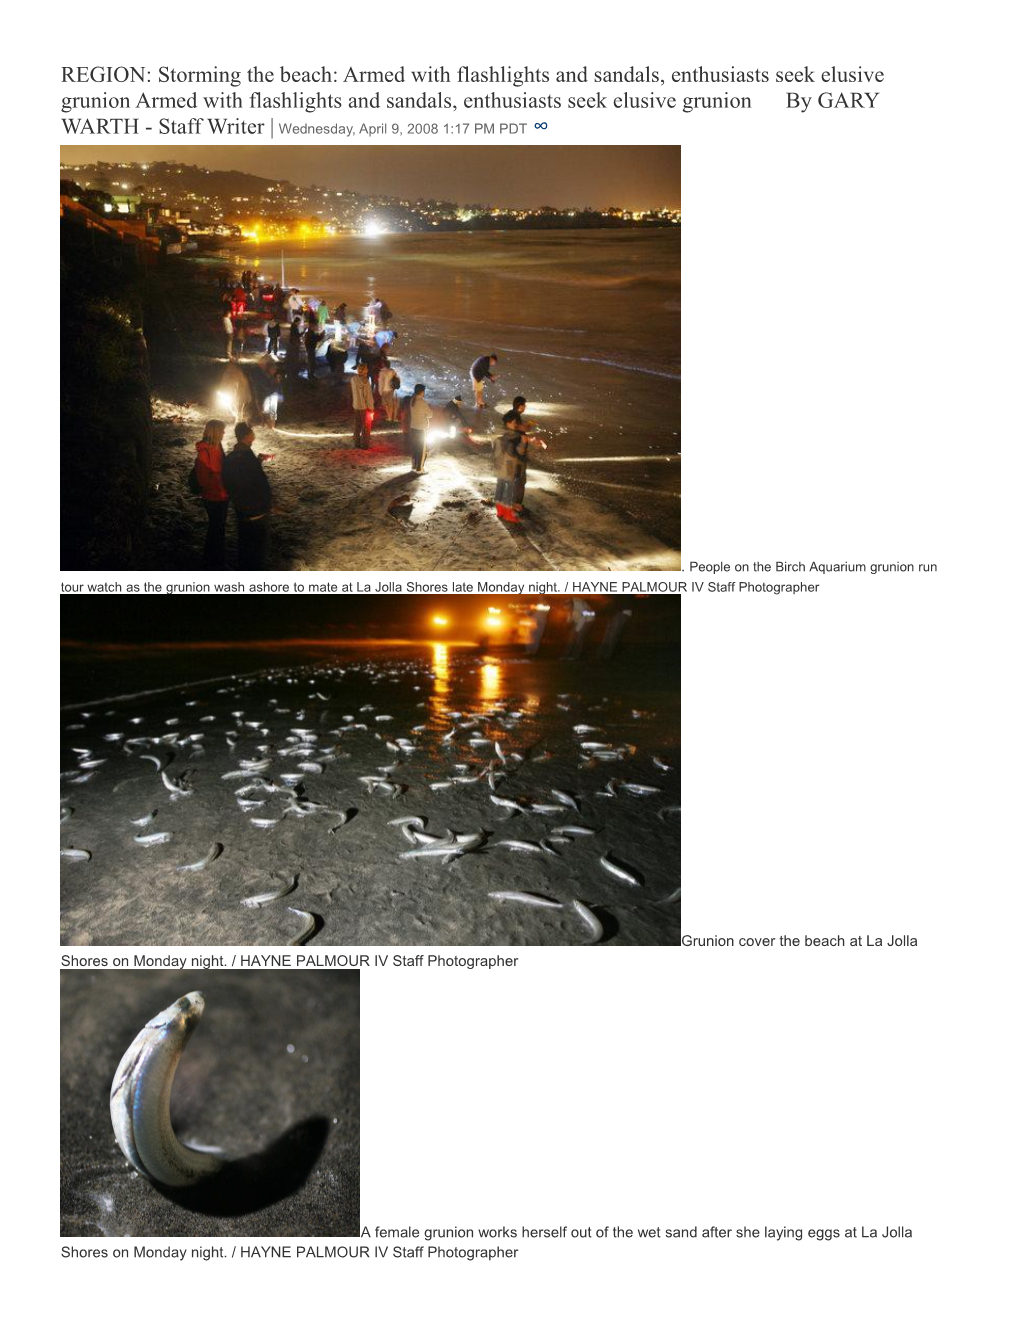 REGION: Storming the Beach: Armed with Flashlights and Sandals, Enthusiasts Seek Elusive Grunion